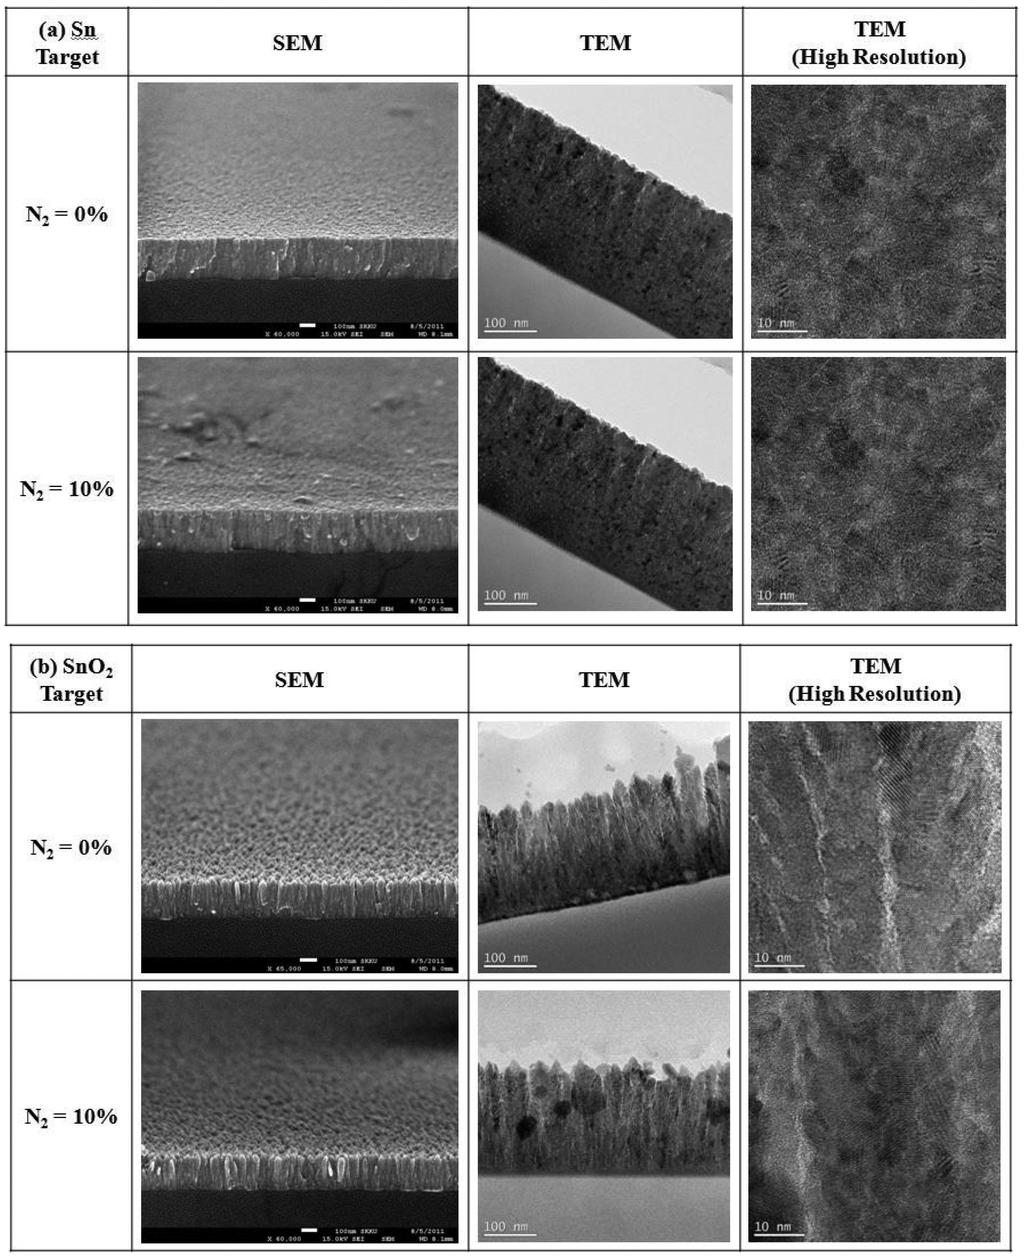 450 Journal of the Korean Ceramic Society - Youngrae Kim and Sarah Eunkyung Kim Vol. 49, No. 5 Fig. 2. SEM and TEM images of the SnO2 thin films: (a) Sn target and (b) SnO2 target.